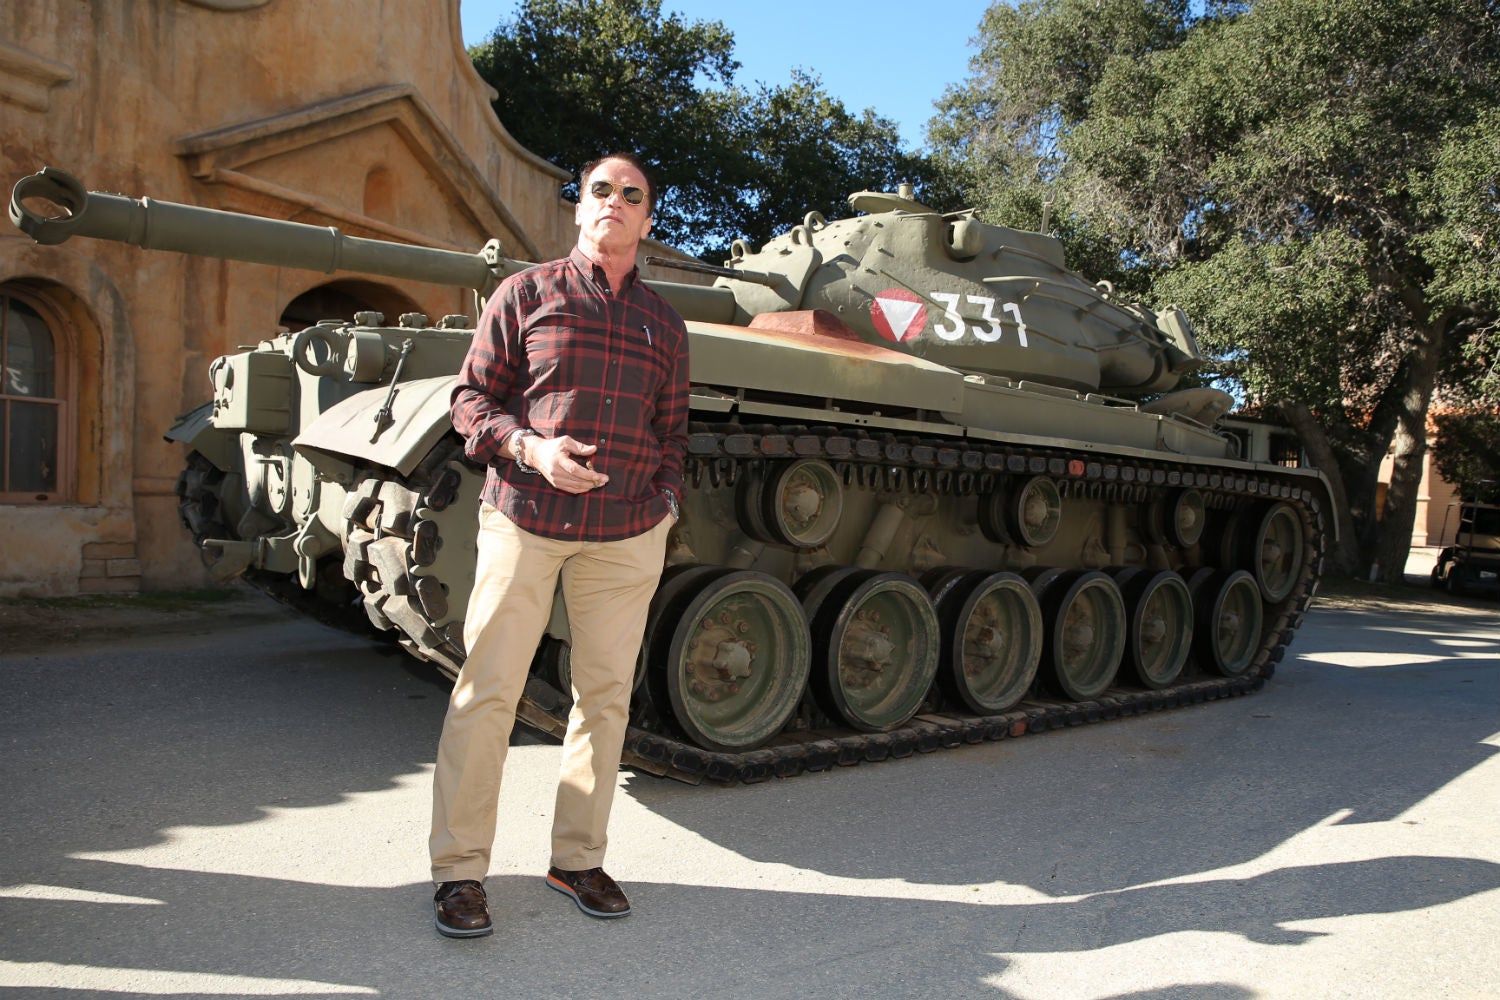 Arnold Schwarzenegger is one of the very few people that actually have a 1951 M-47 Patton tank in their garages